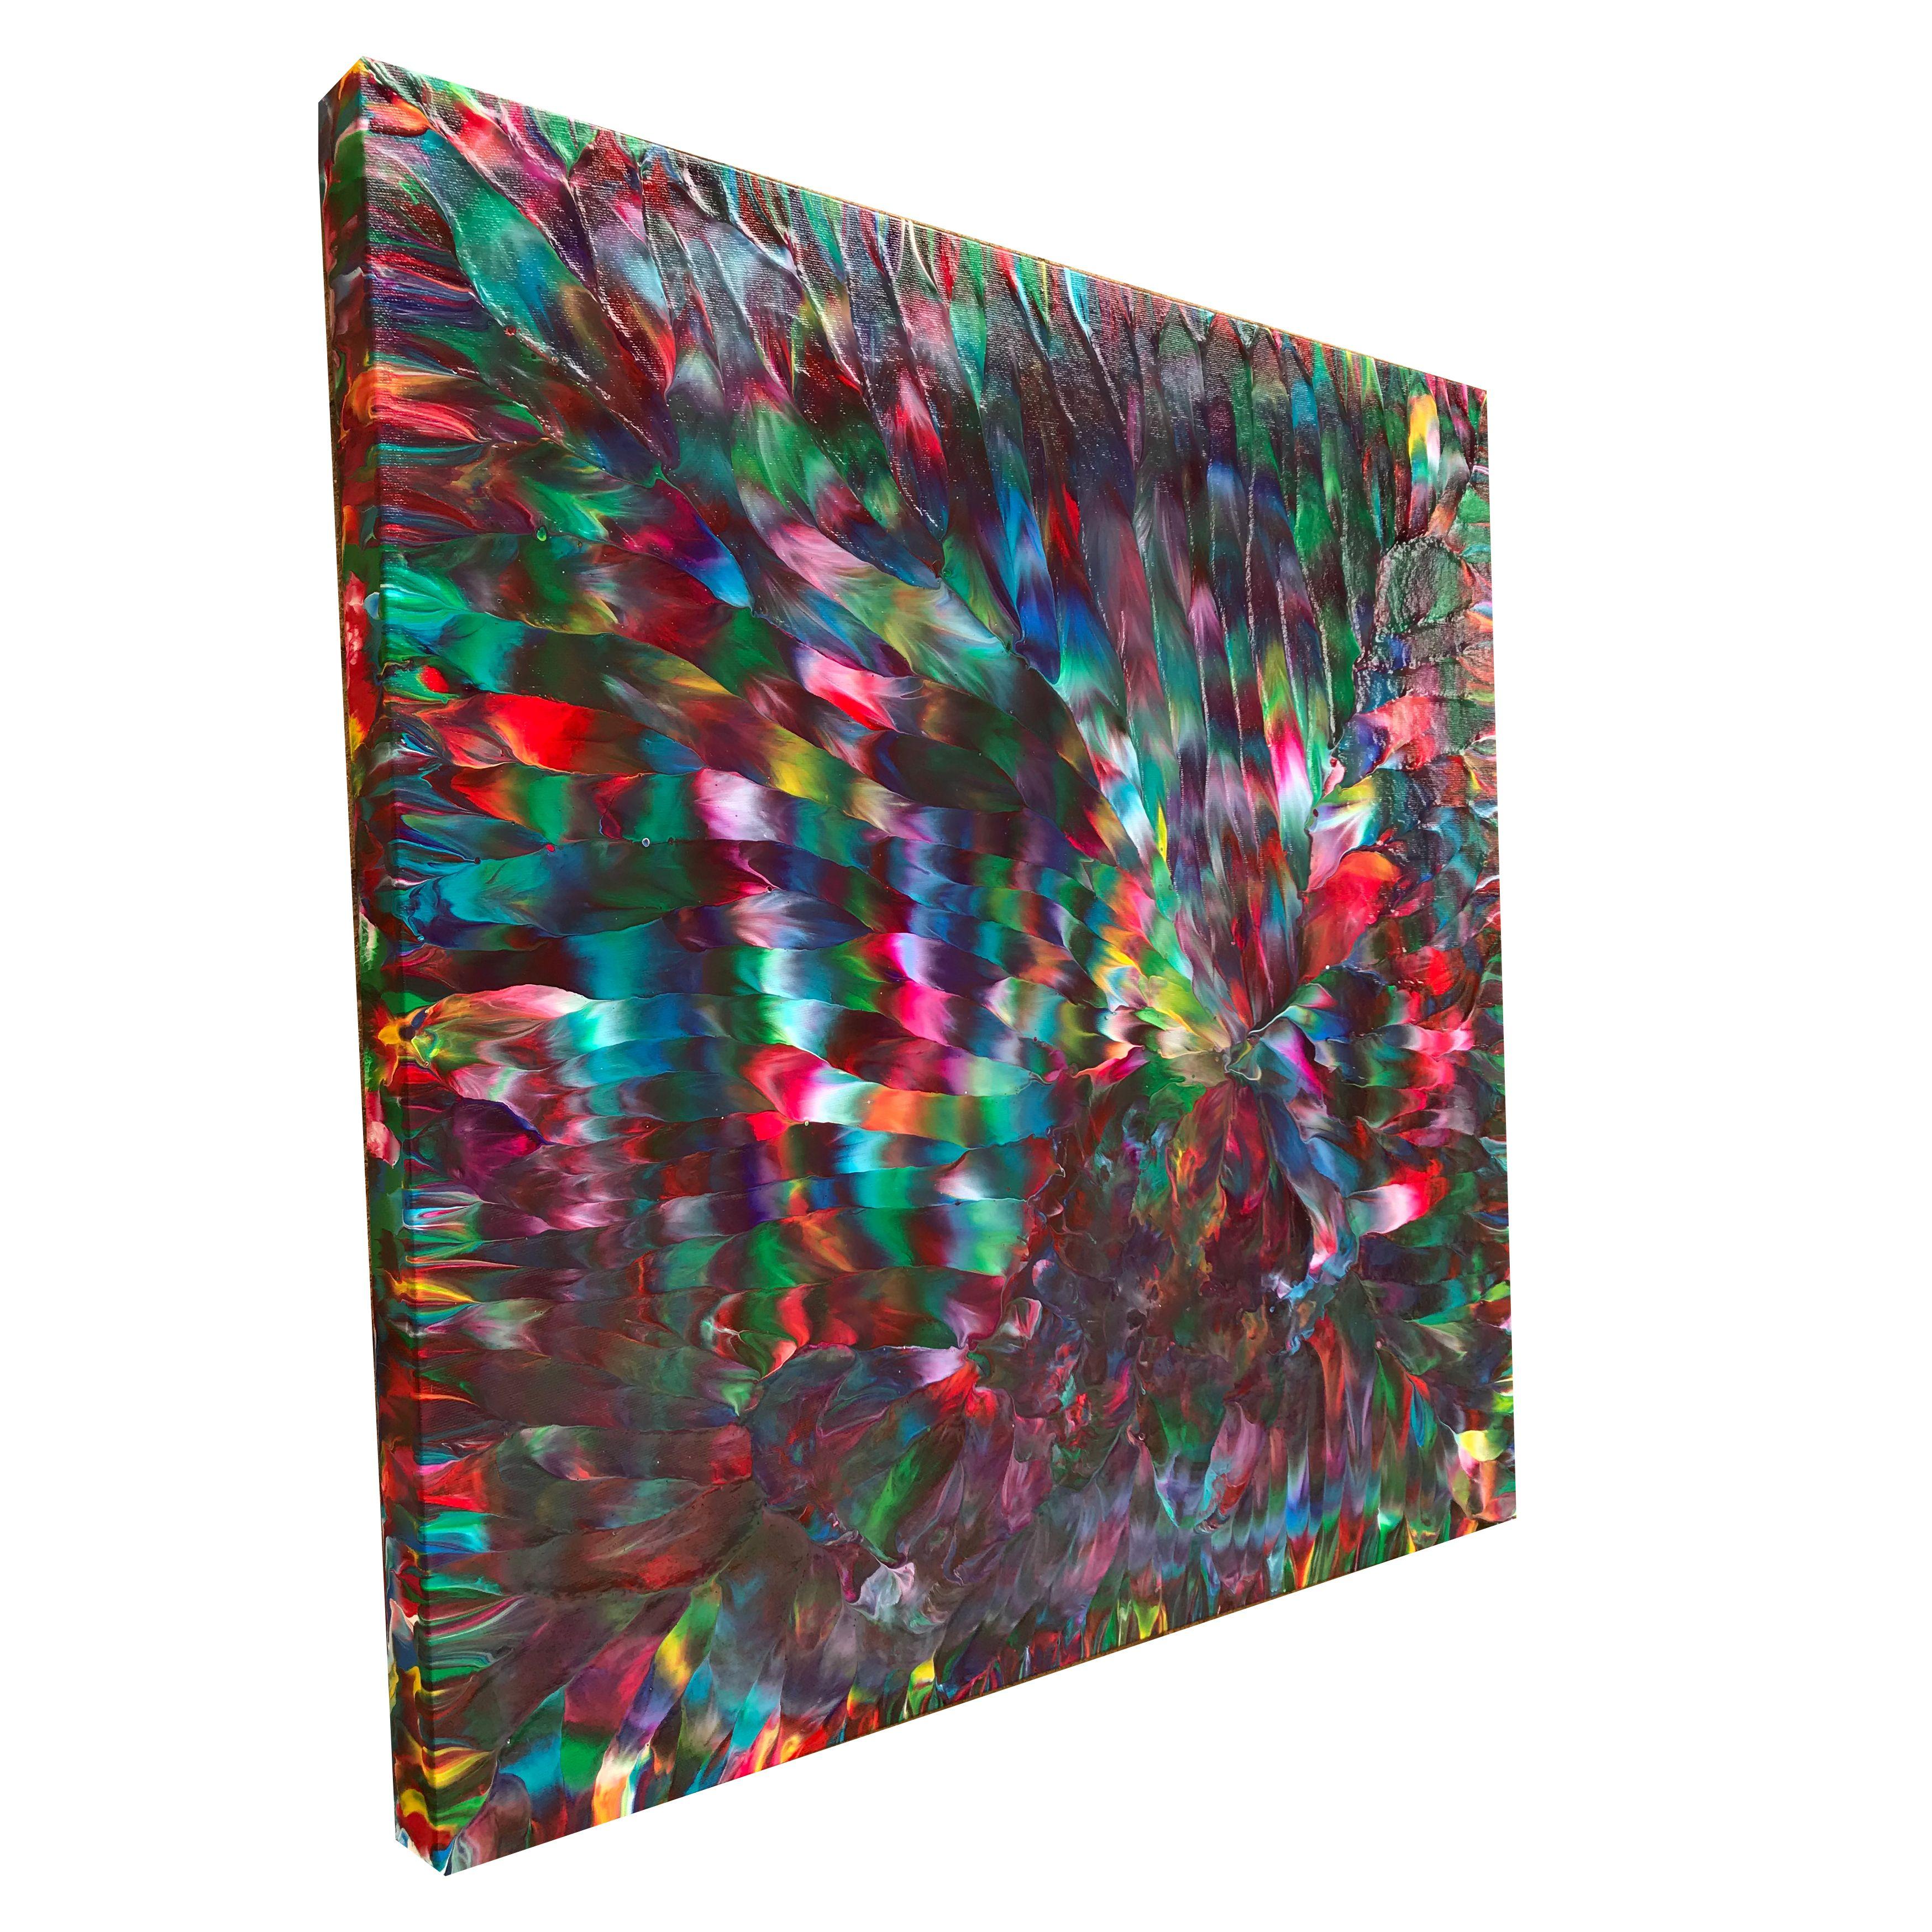 The Vortex of Eden is an original, spontaneous, abstract expressionism painting, painted with a beautiful emerald green color, complimenting the bold and vibrant red and magenta used. Deep, rich burgundy and purple tones, allow for the swirling